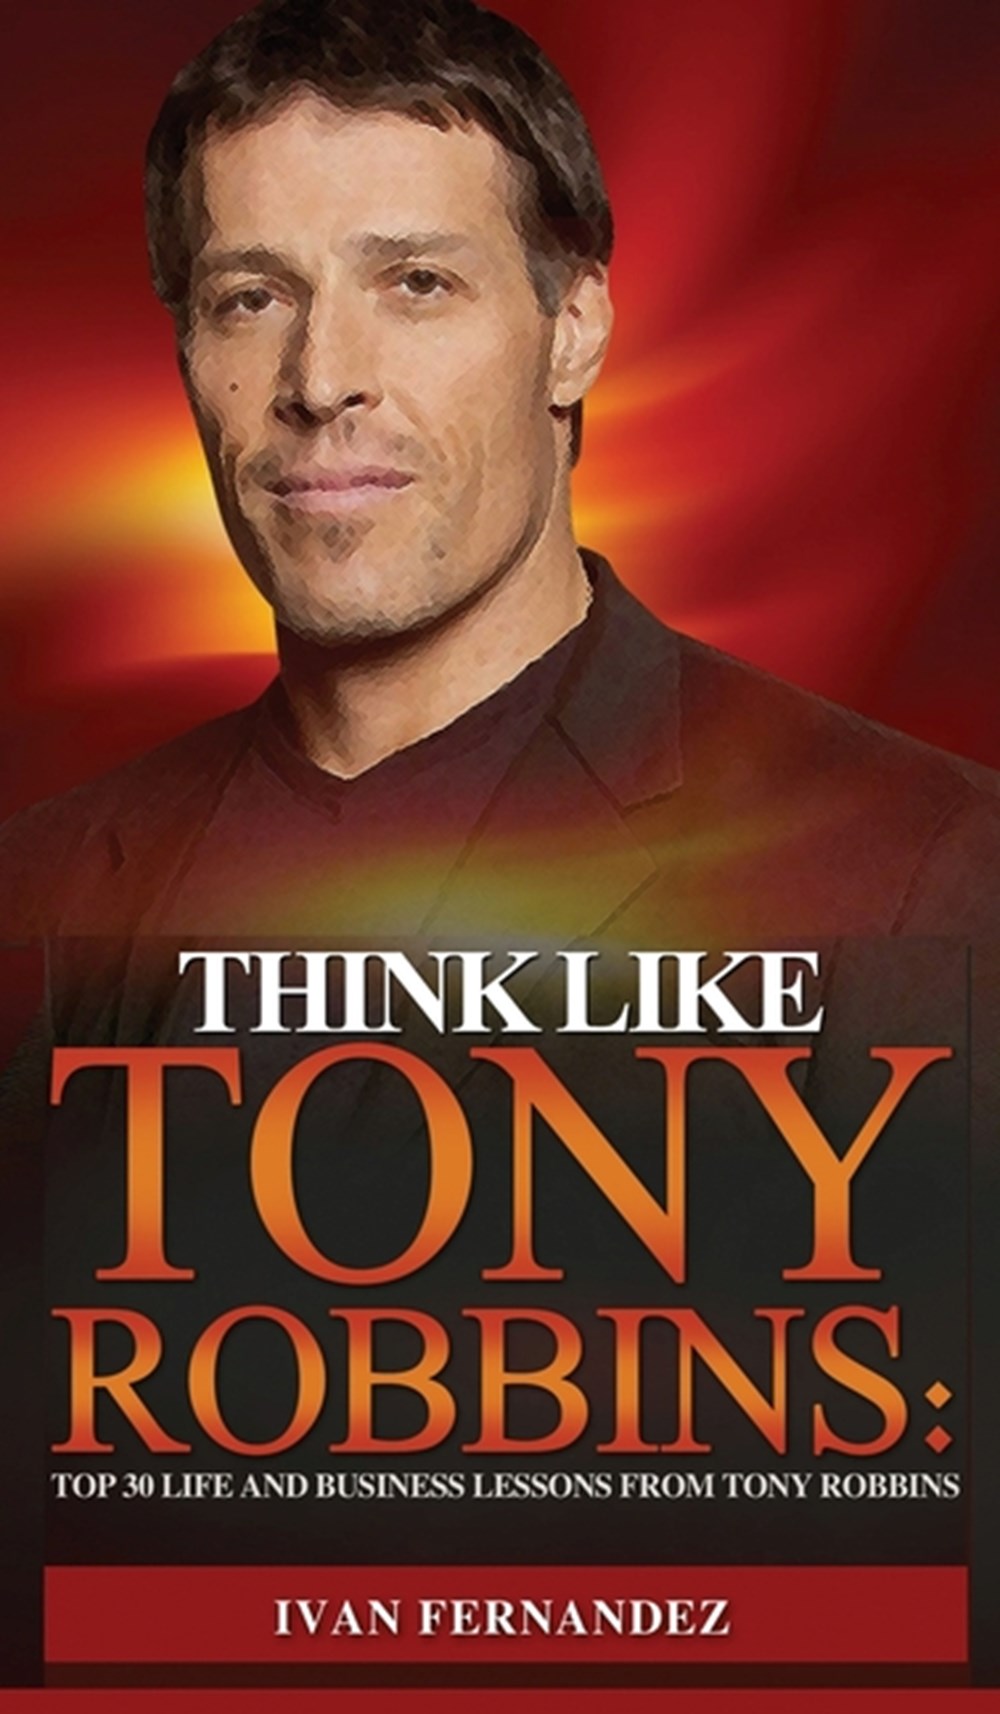 Think Like Tony Robbins Top 30 Life and Business Lessons from Tony Robbins